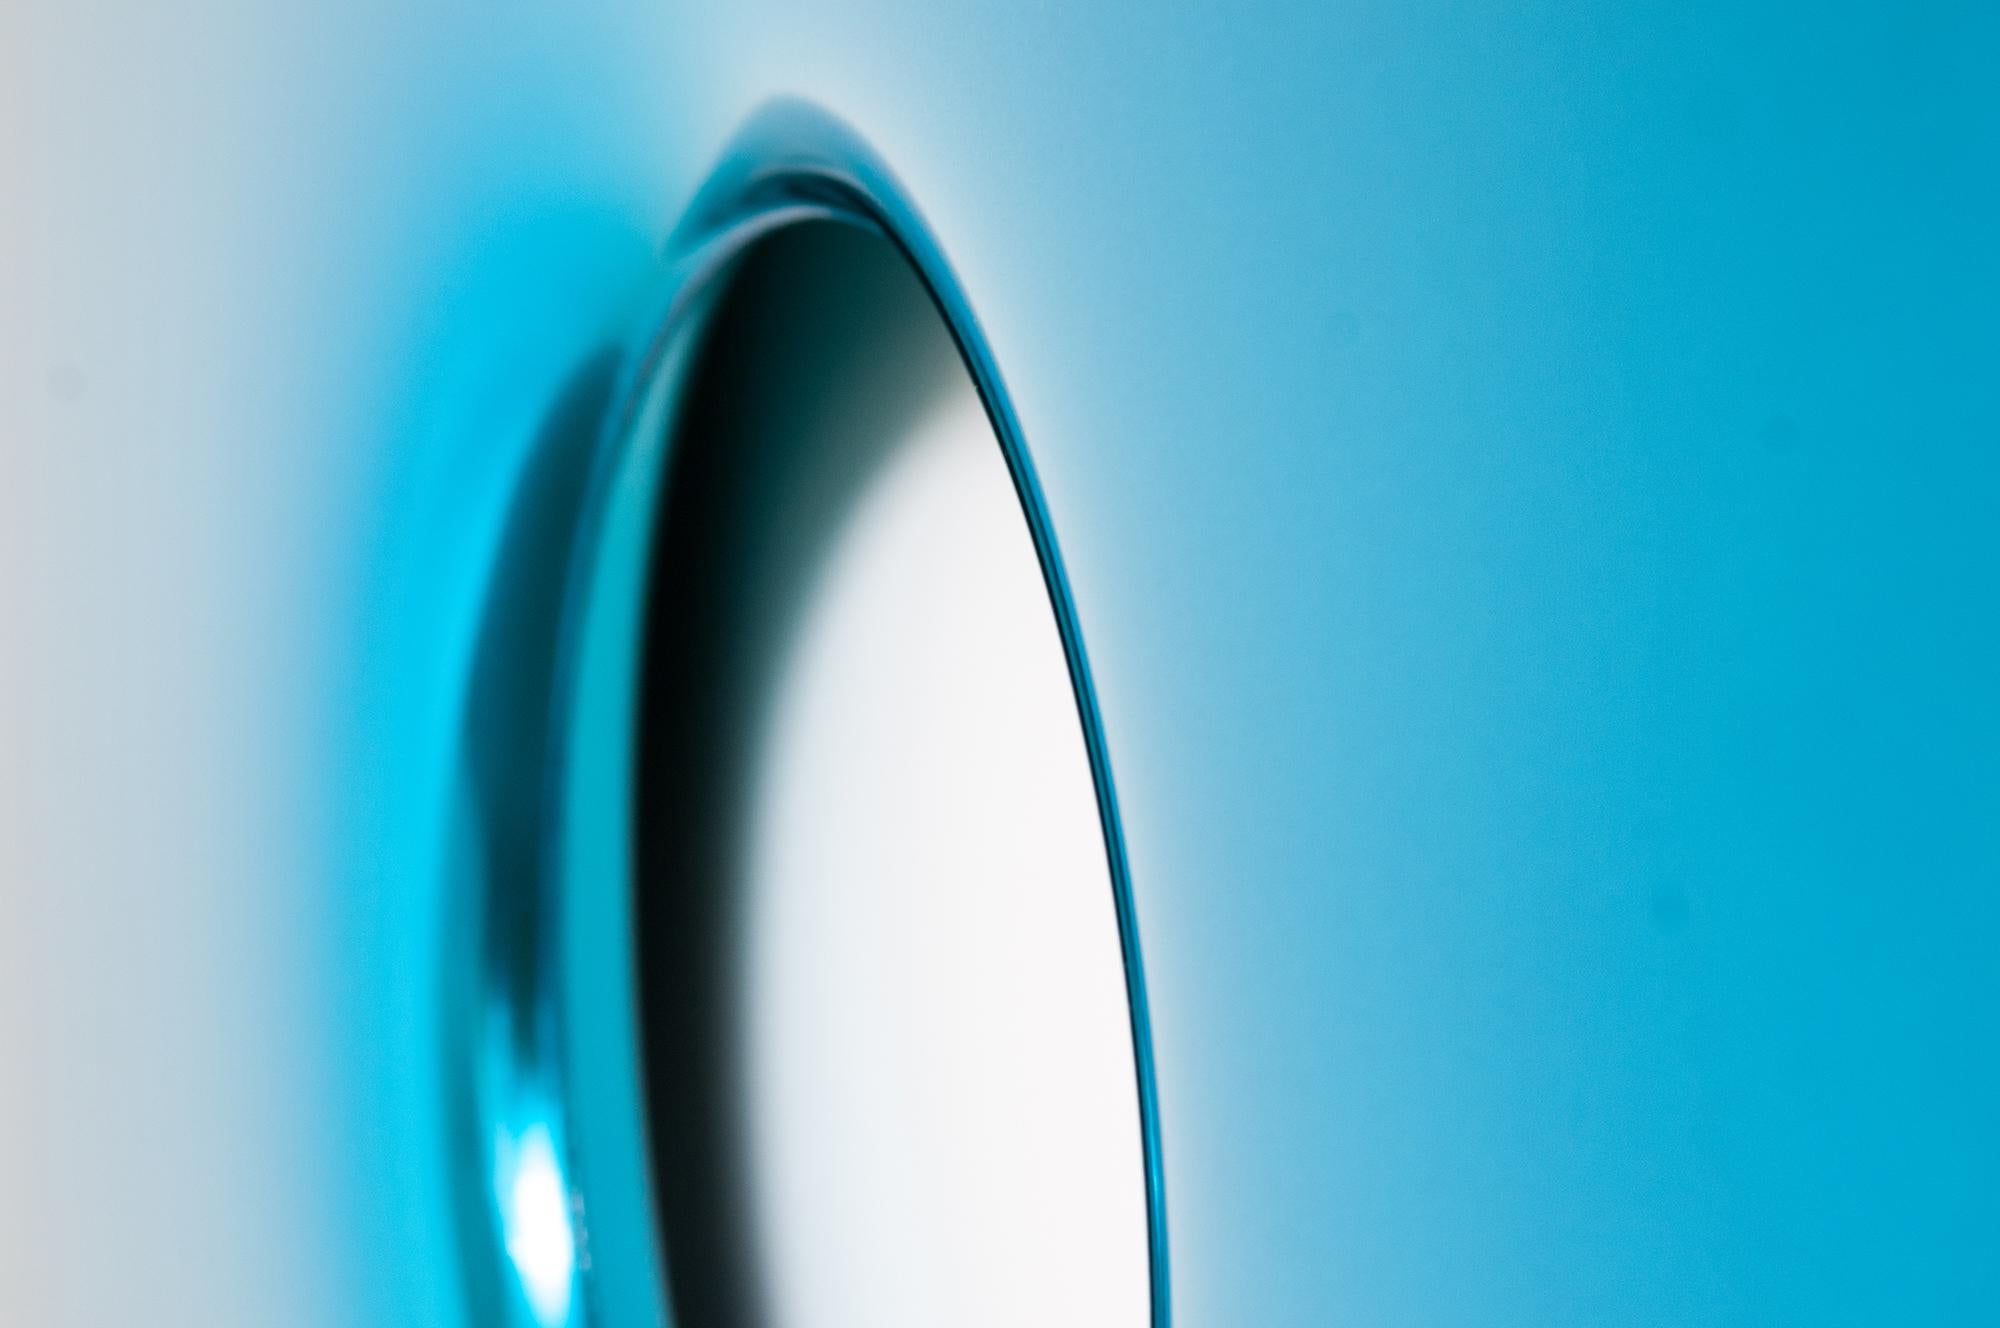 Limited edition mirror in space blue made of polished stainless steel.